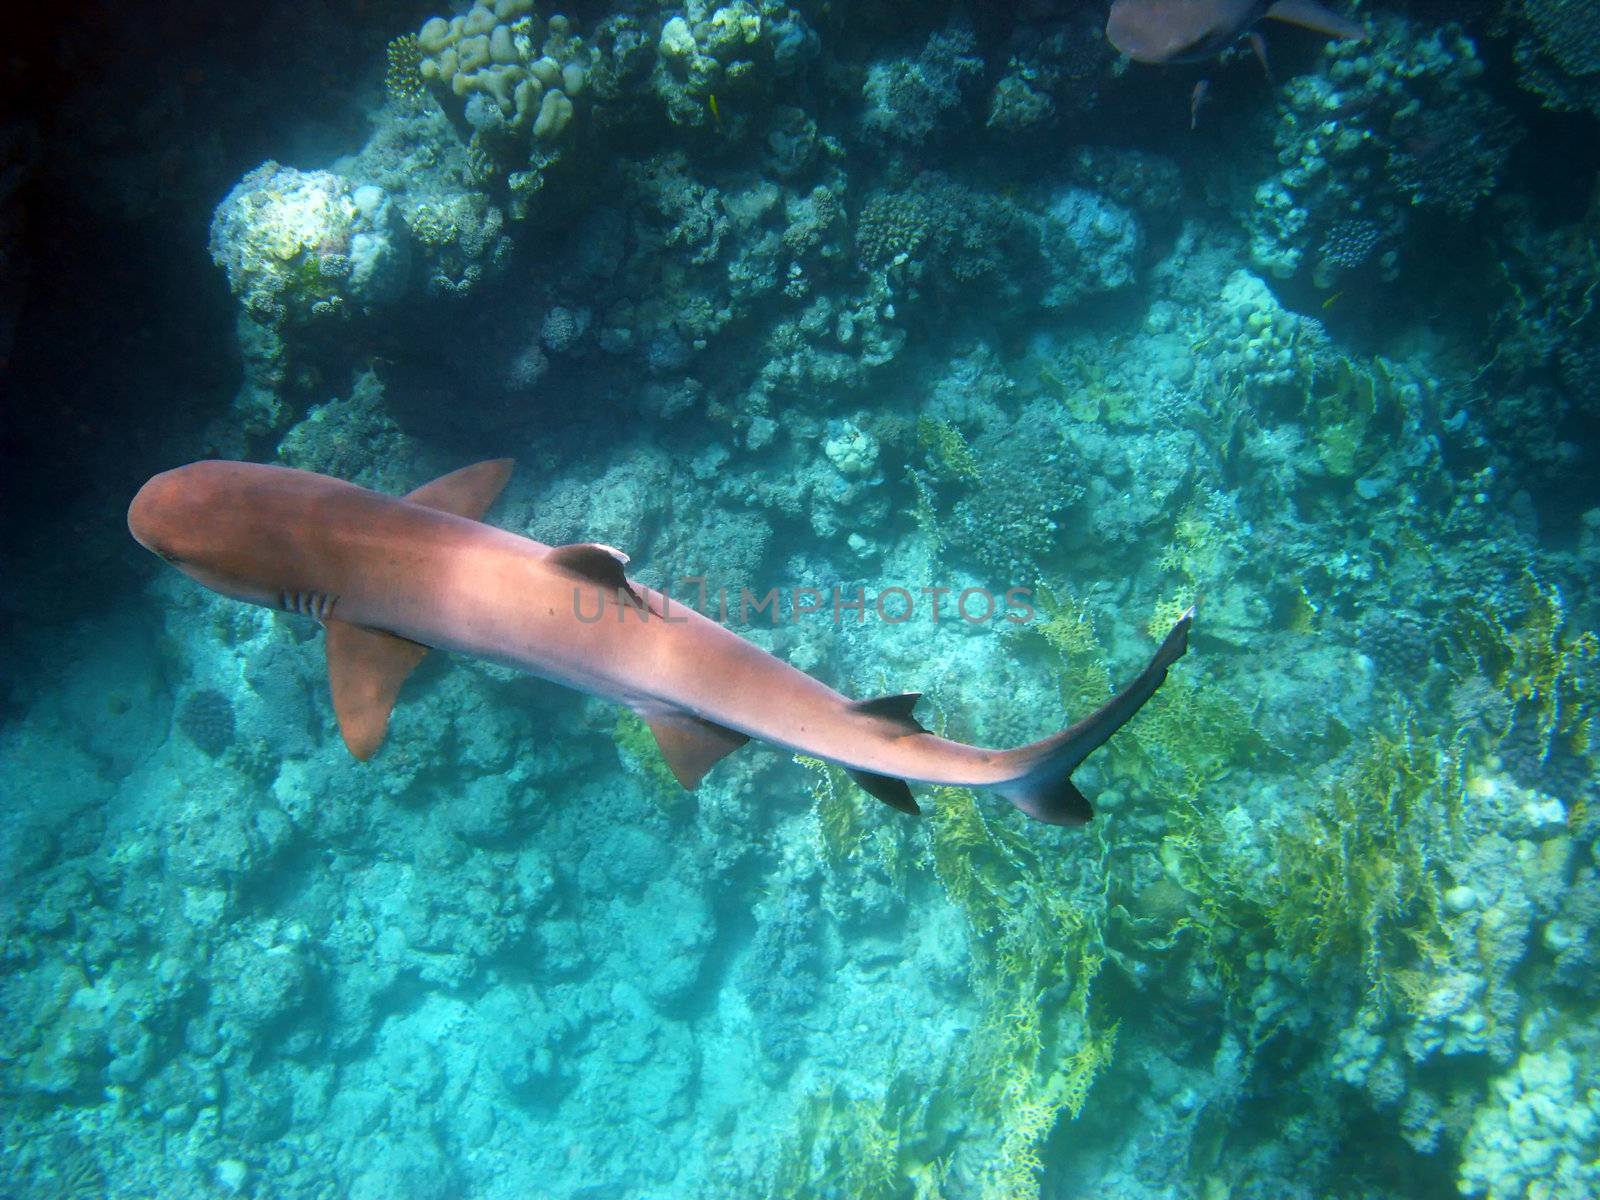 Whitetip reef shark and coral reef in Red sea